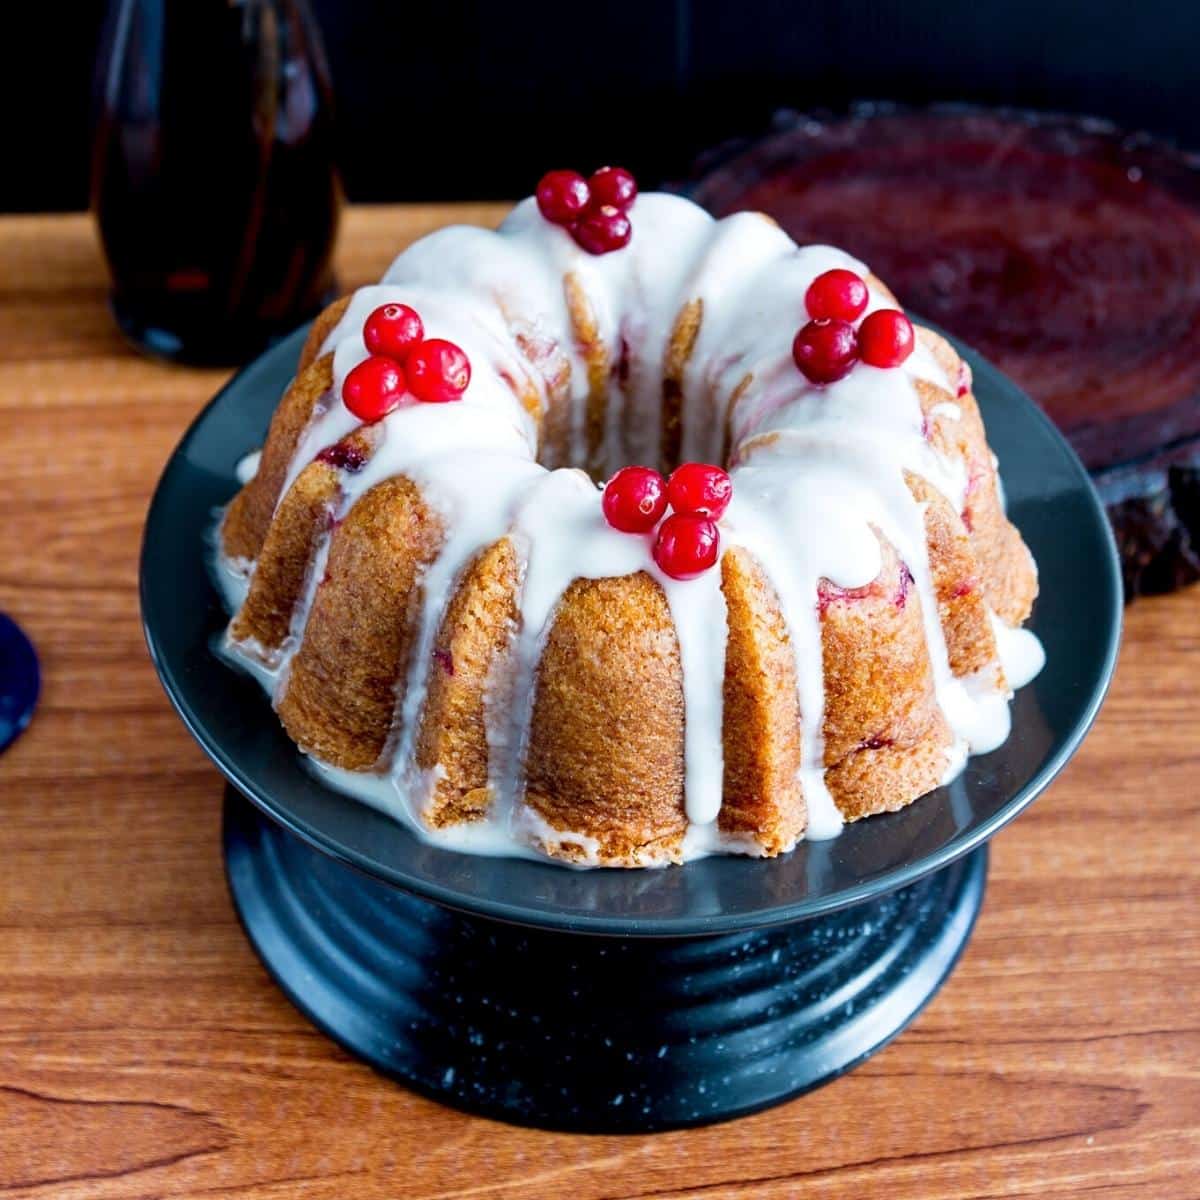 A bundt cake with fresh cranberries on cake stand.